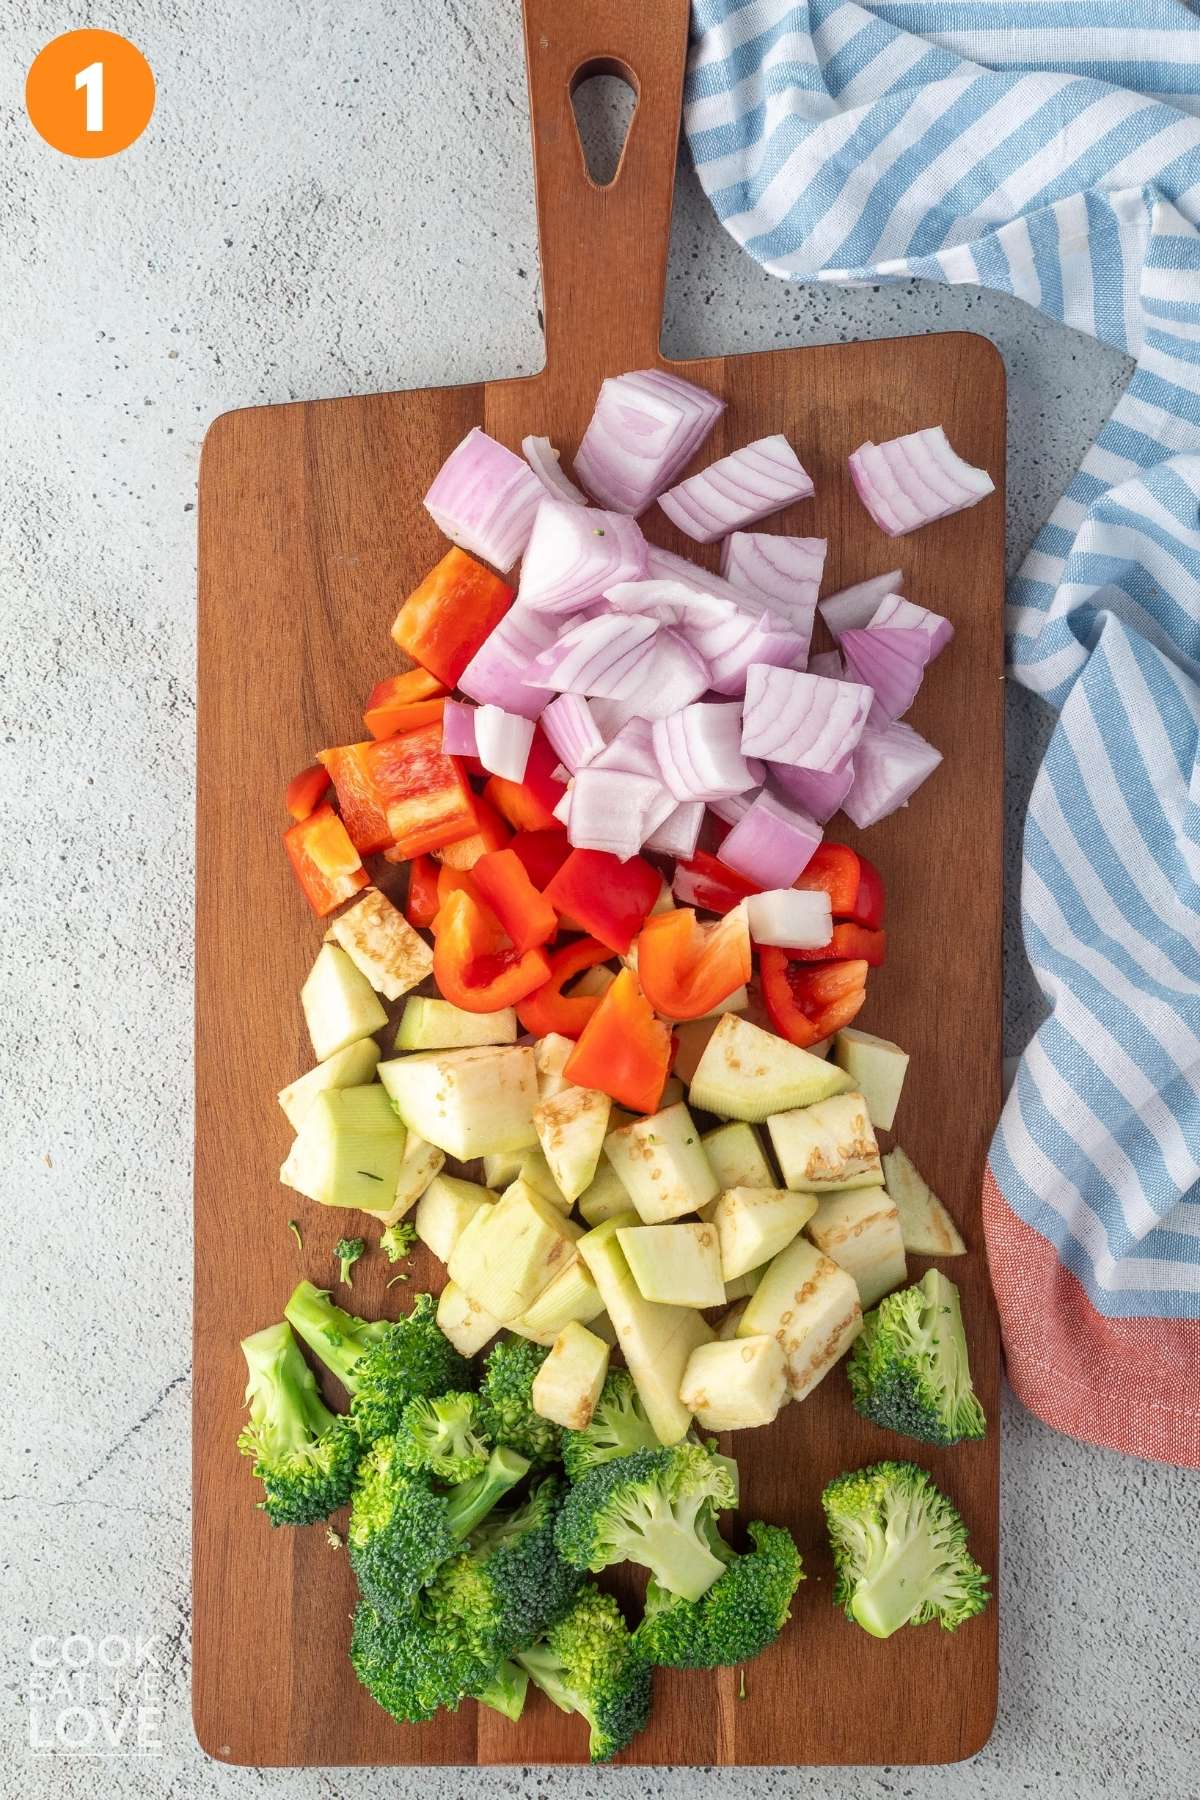 Vegetables on a wooden cutting board.